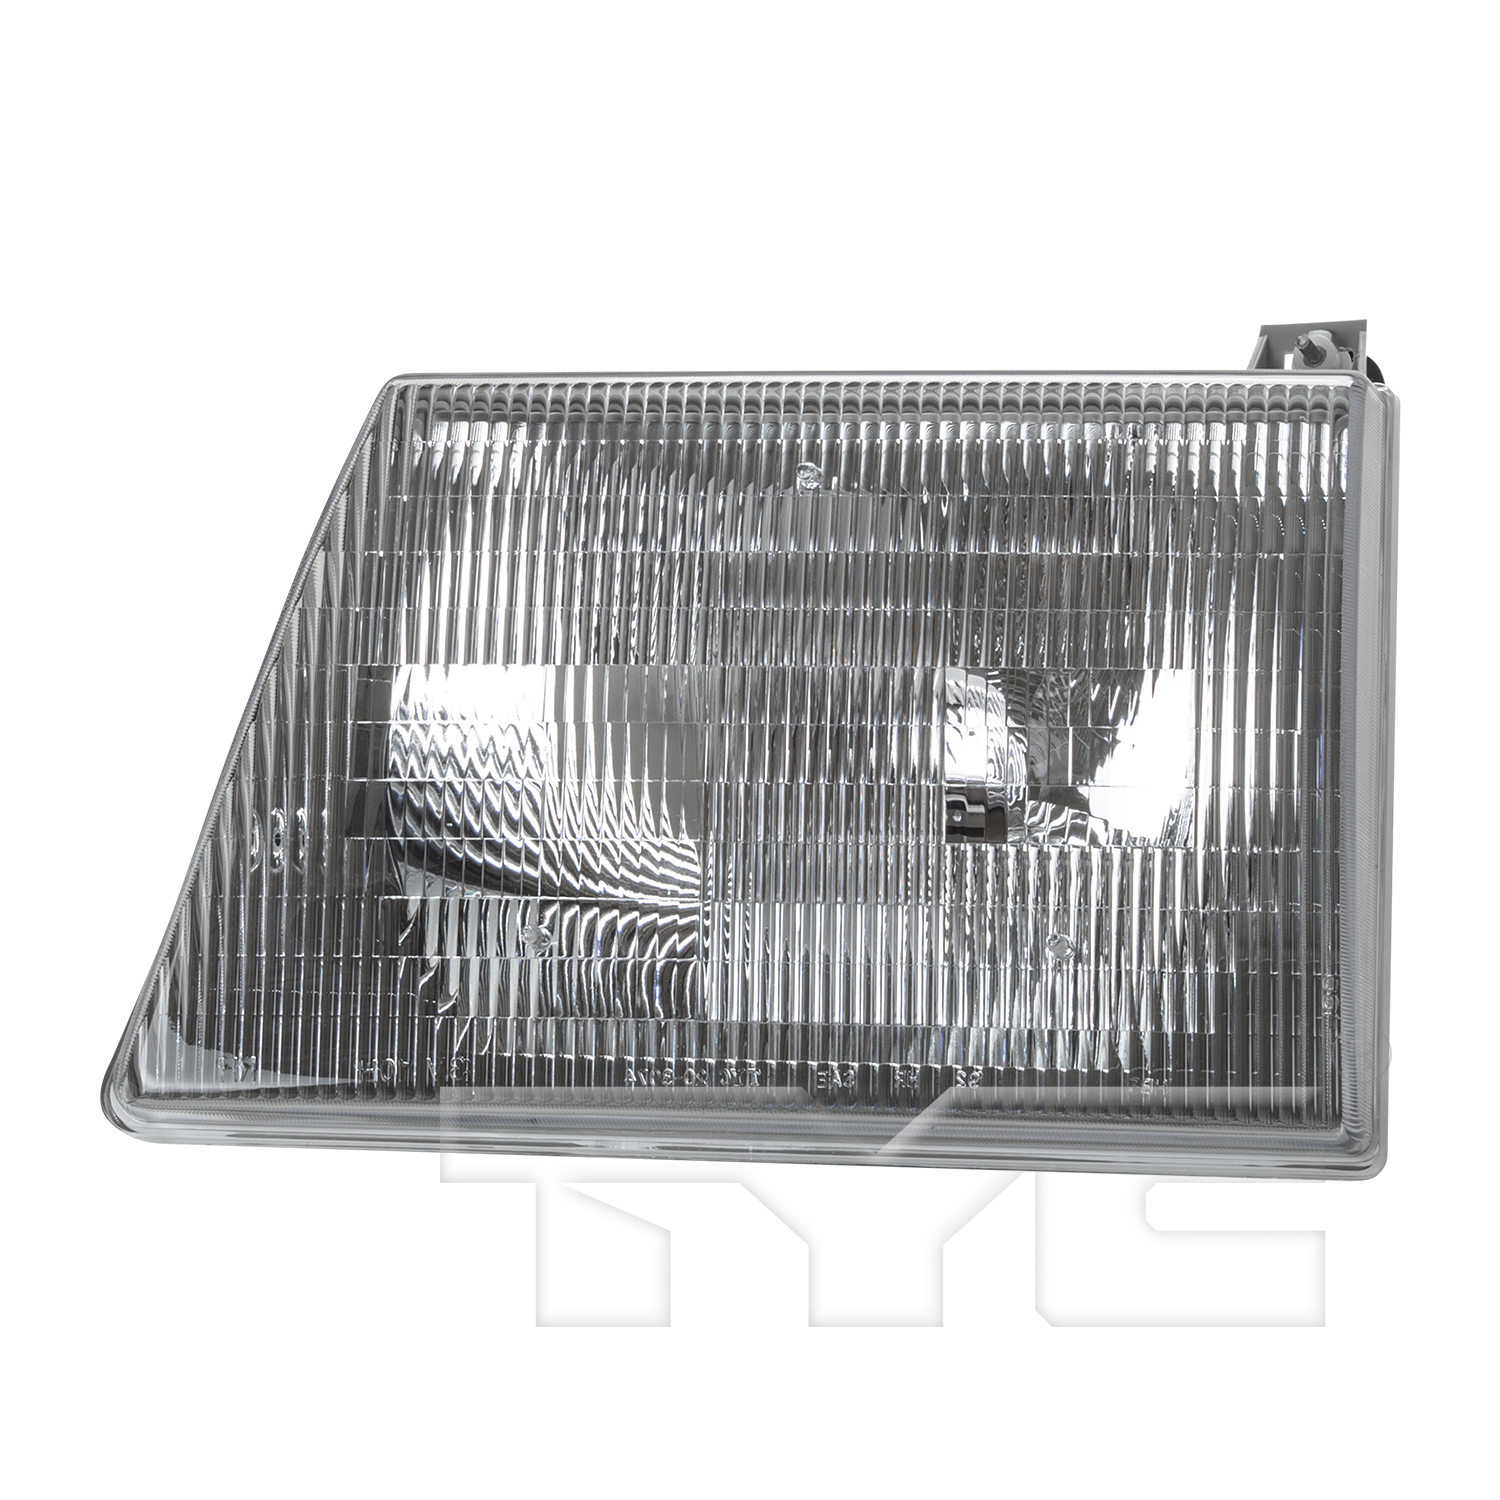 Aftermarket HEADLIGHTS for FORD - E-350 ECONOLINE CLUB WAGON, E-350 ECONOLINE CLUB WAGON,97-02,LT Headlamp assy composite